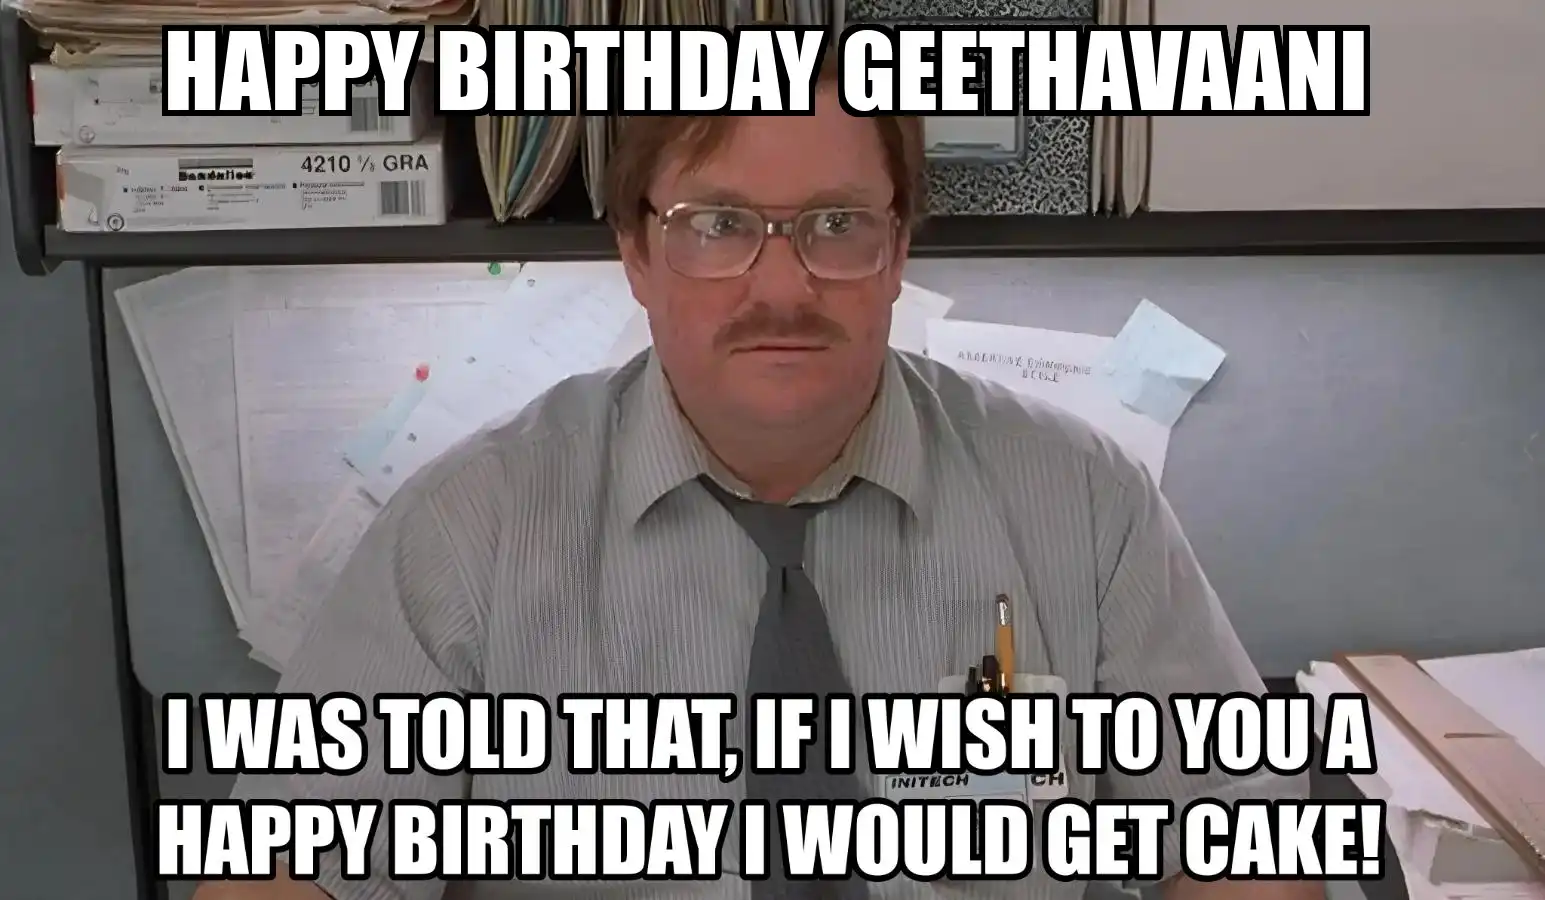 Happy Birthday Geethavaani I Would Get A Cake Meme